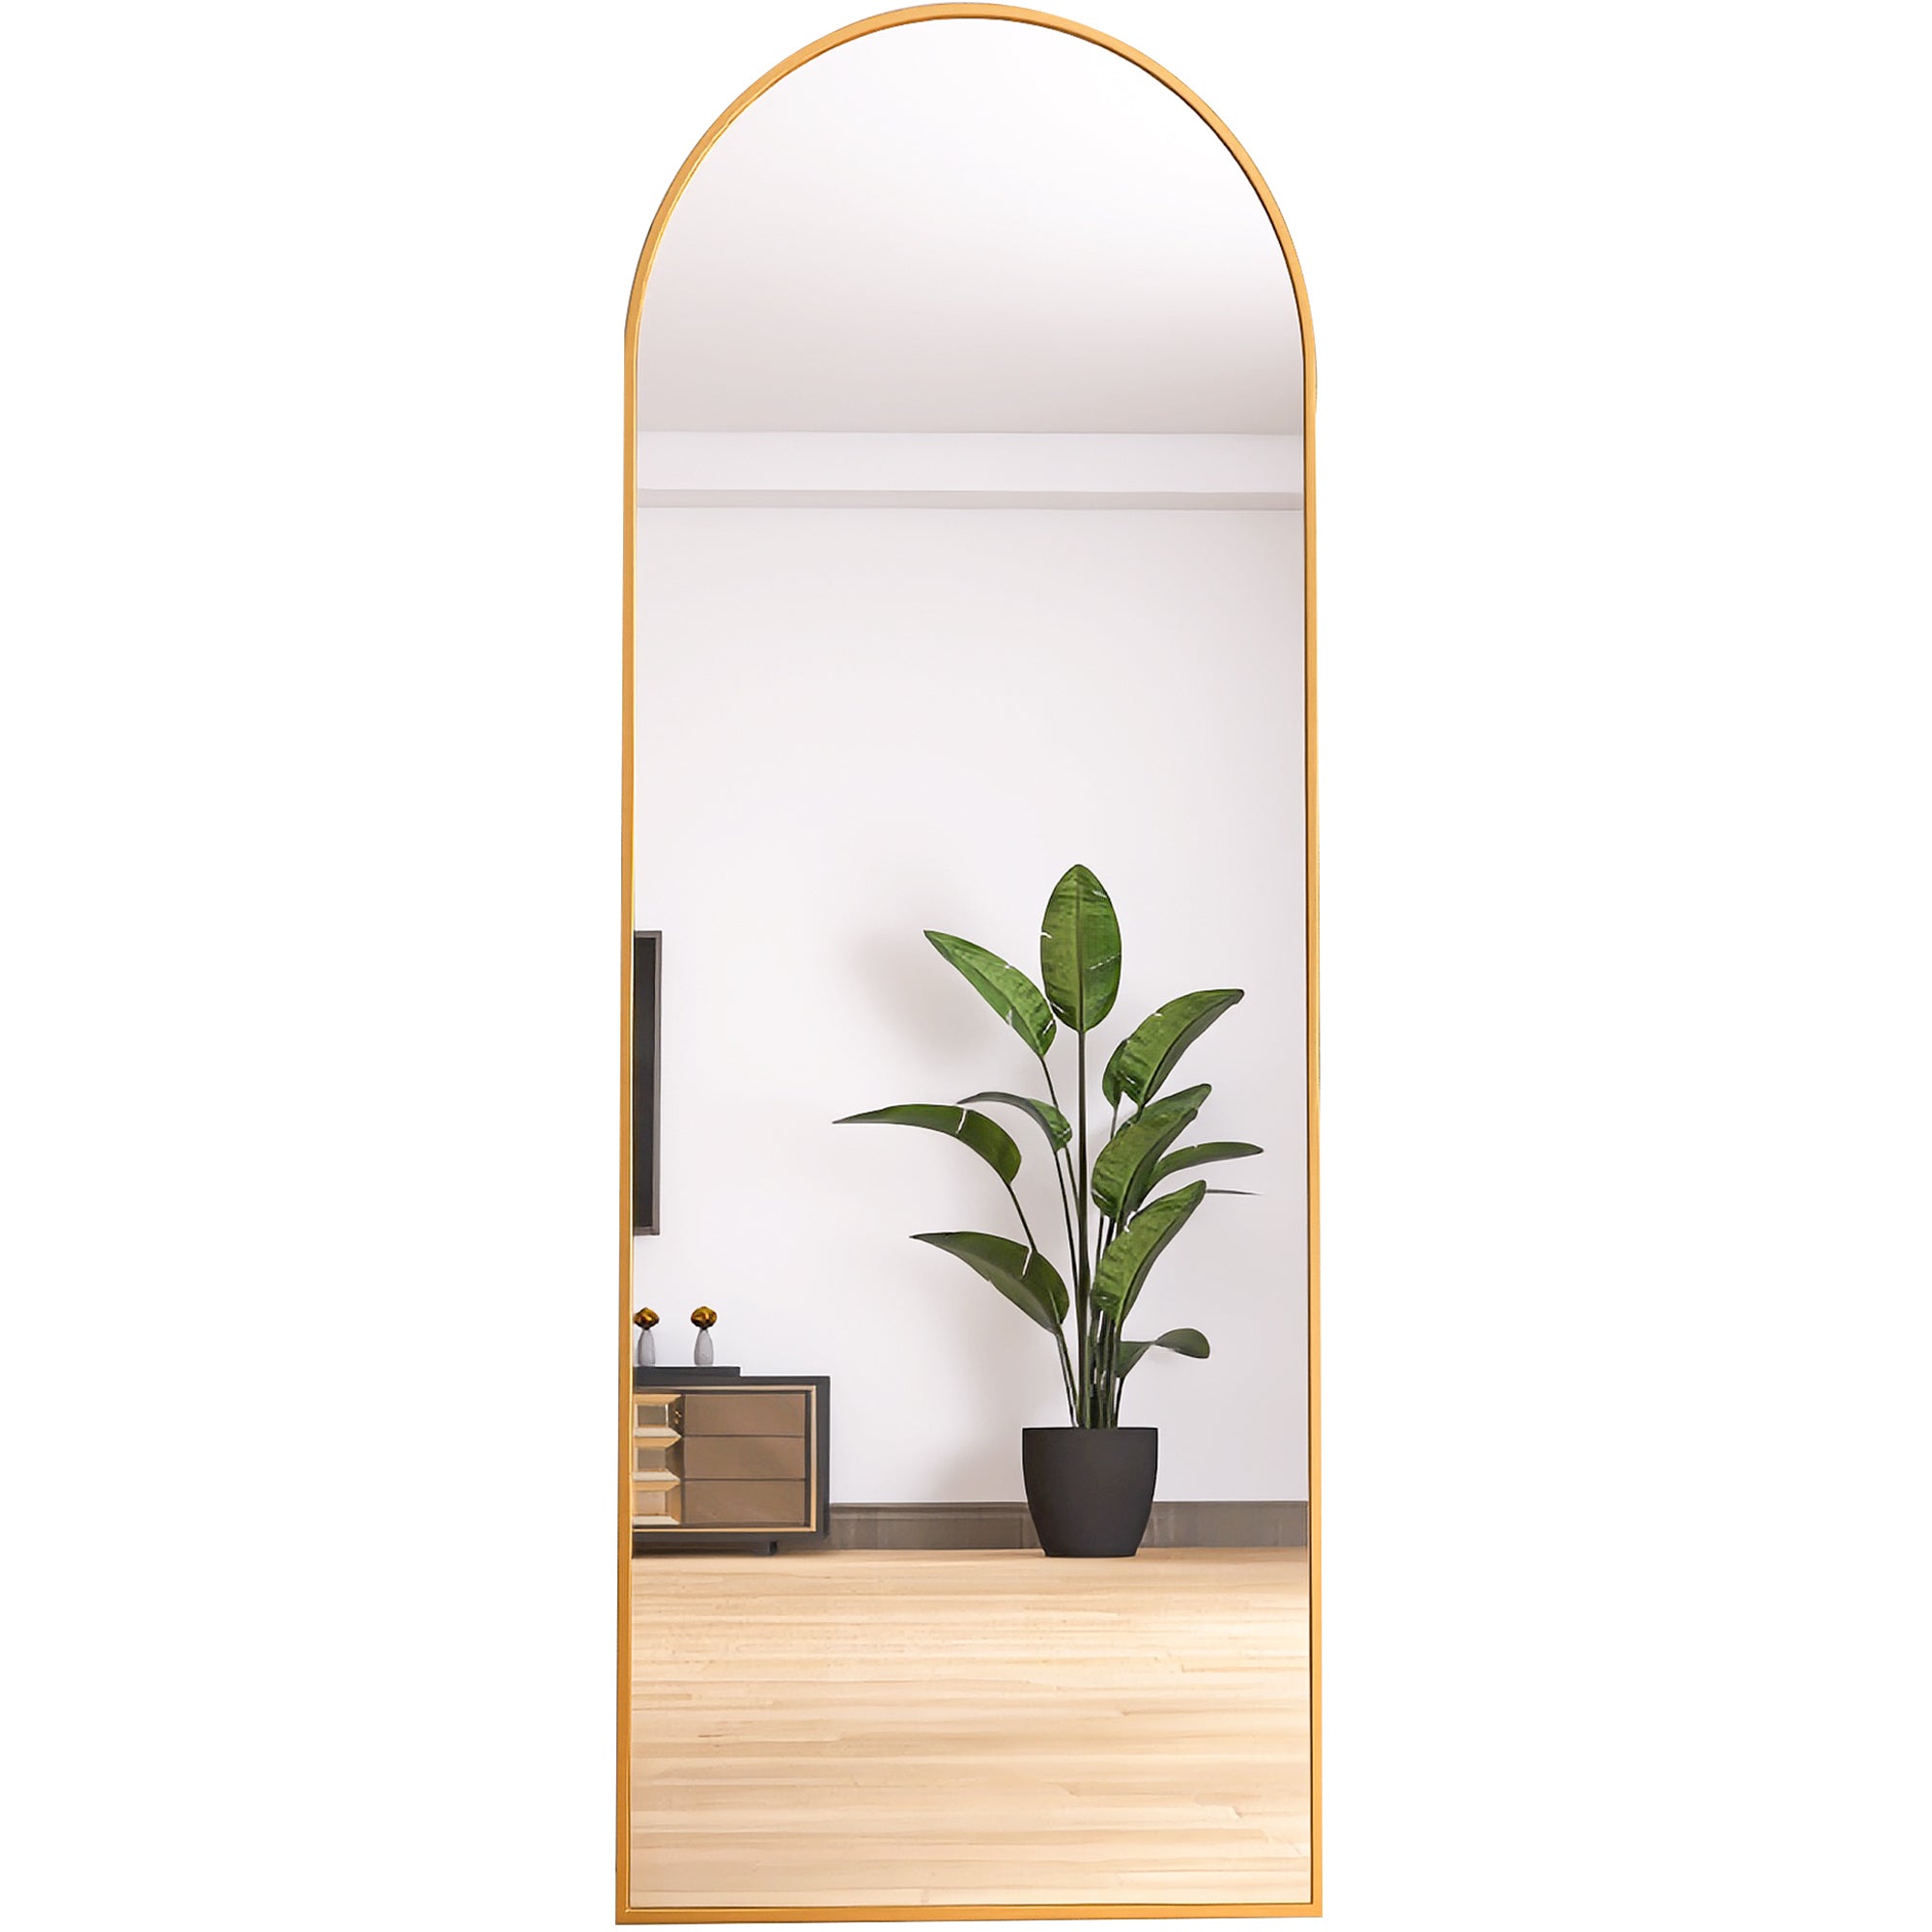 Arched Full Length Mirror Floor Mirror Hanging Standing or Leaning (Gold)